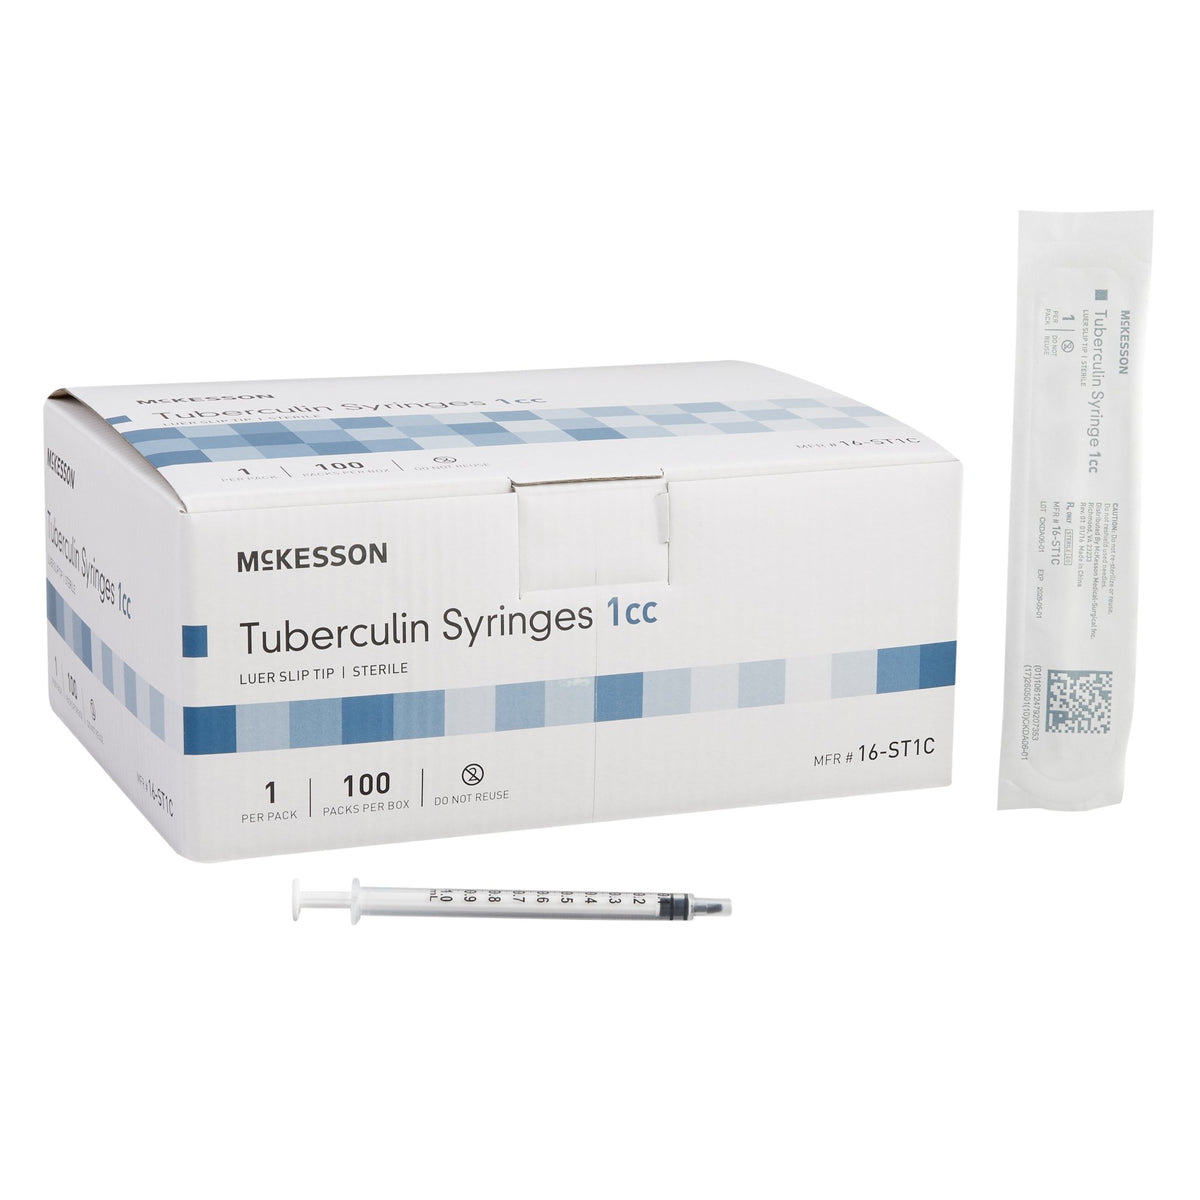 Tuberculin Syringe Mckesson 1 Ml Blister Pack Luer Slip Tip Without Sa Hydreight Store 